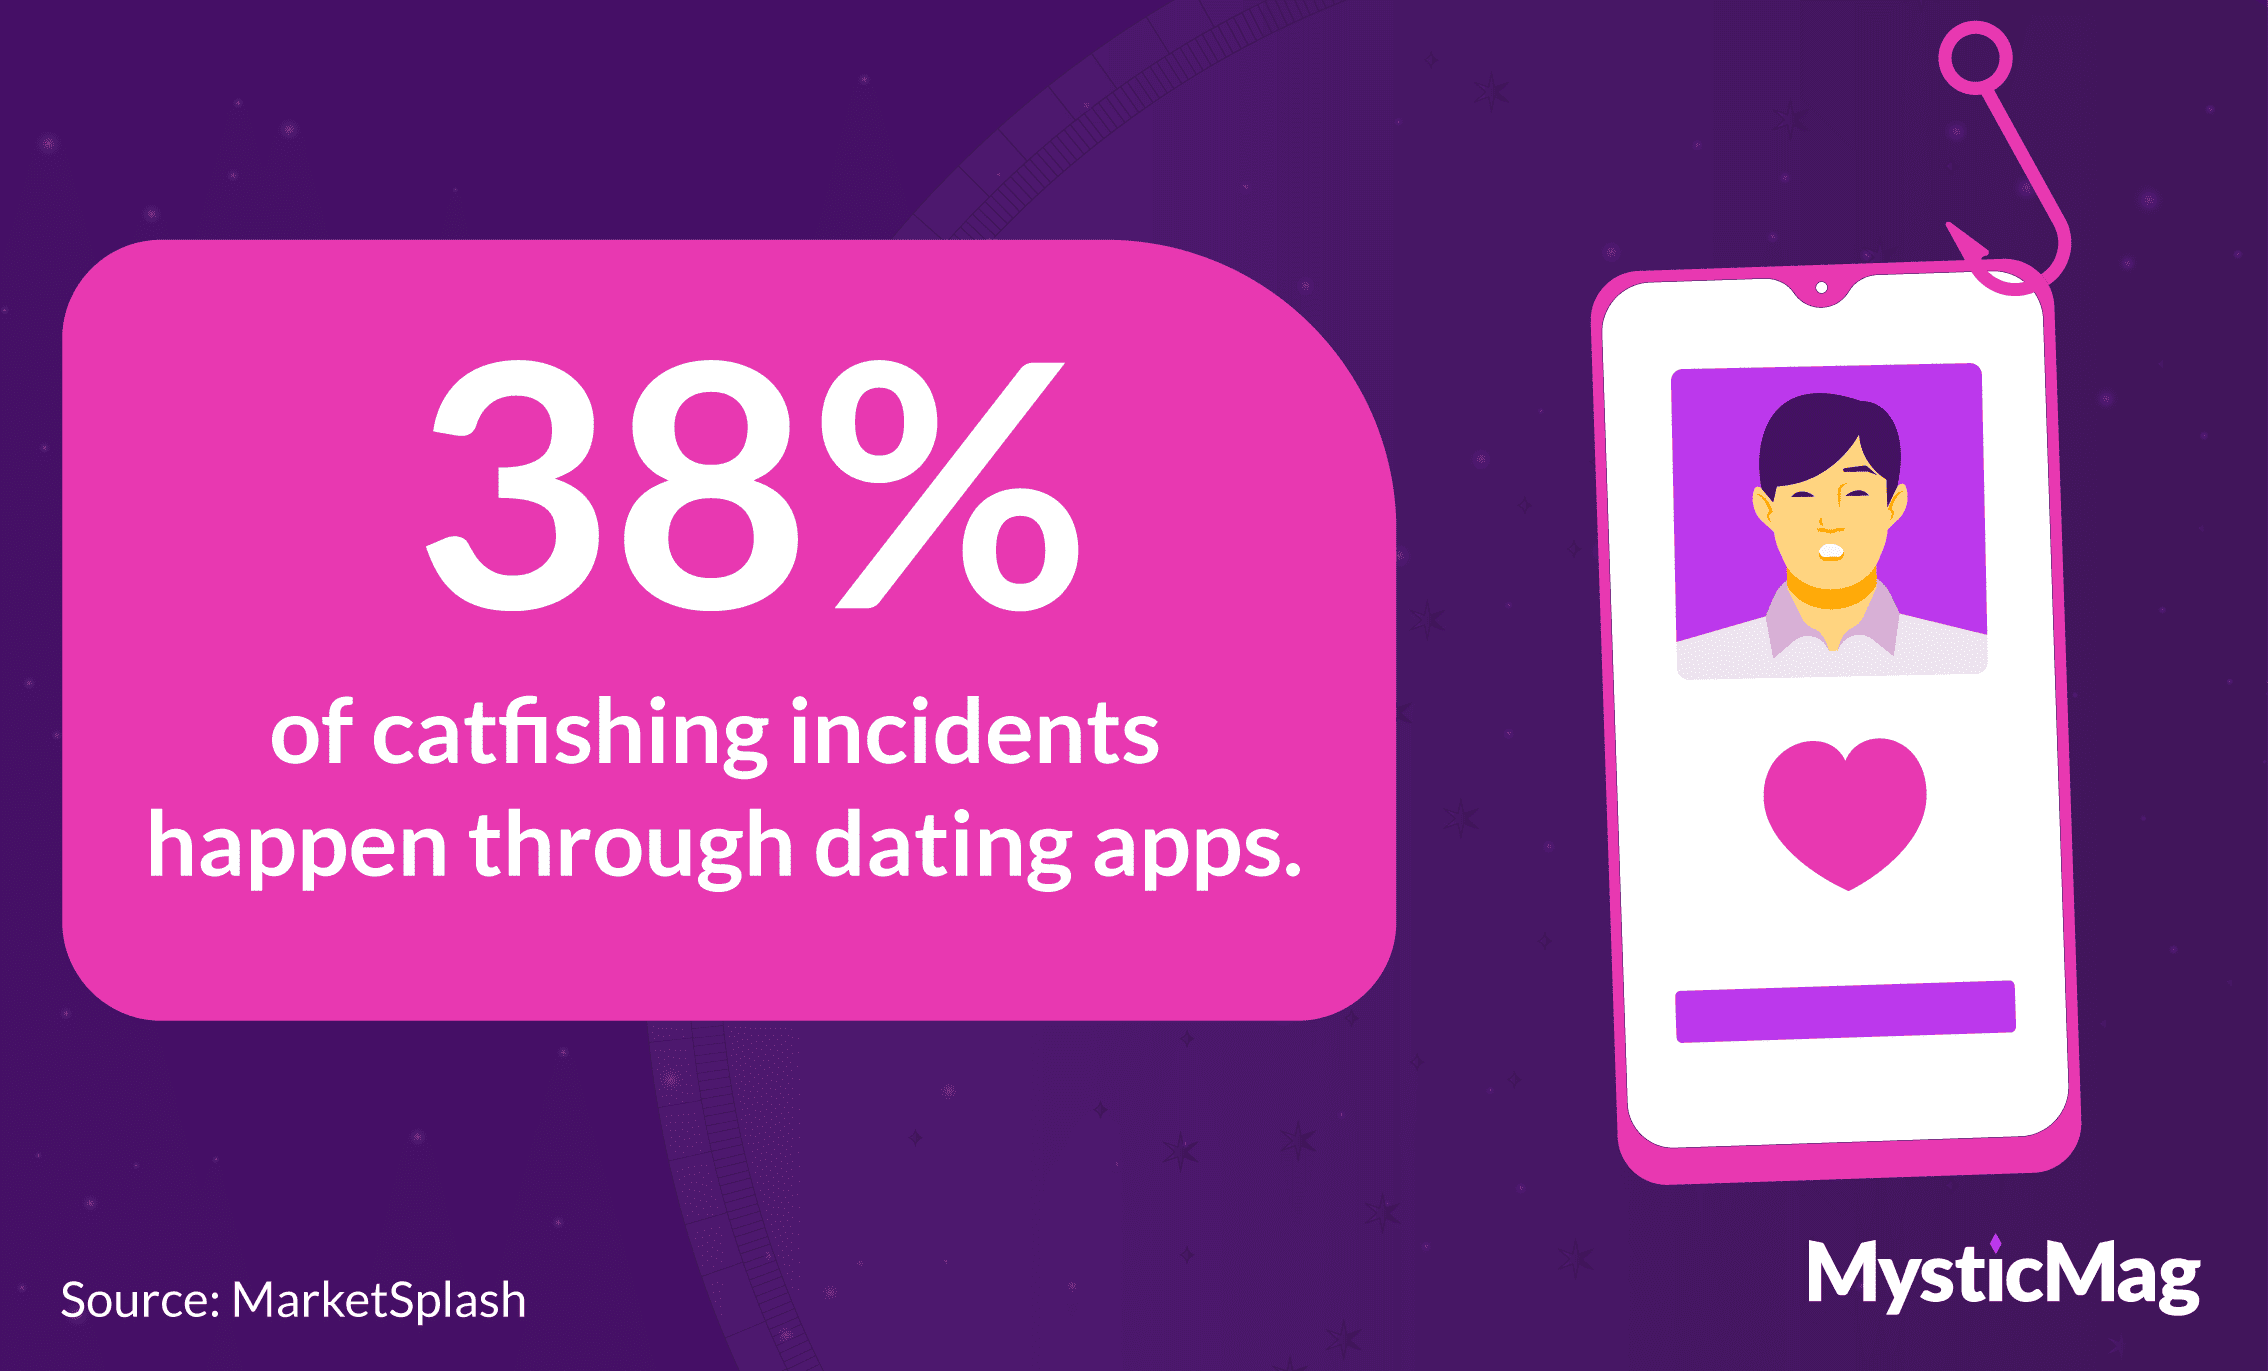 38% of catfishing incidents happen through dating apps